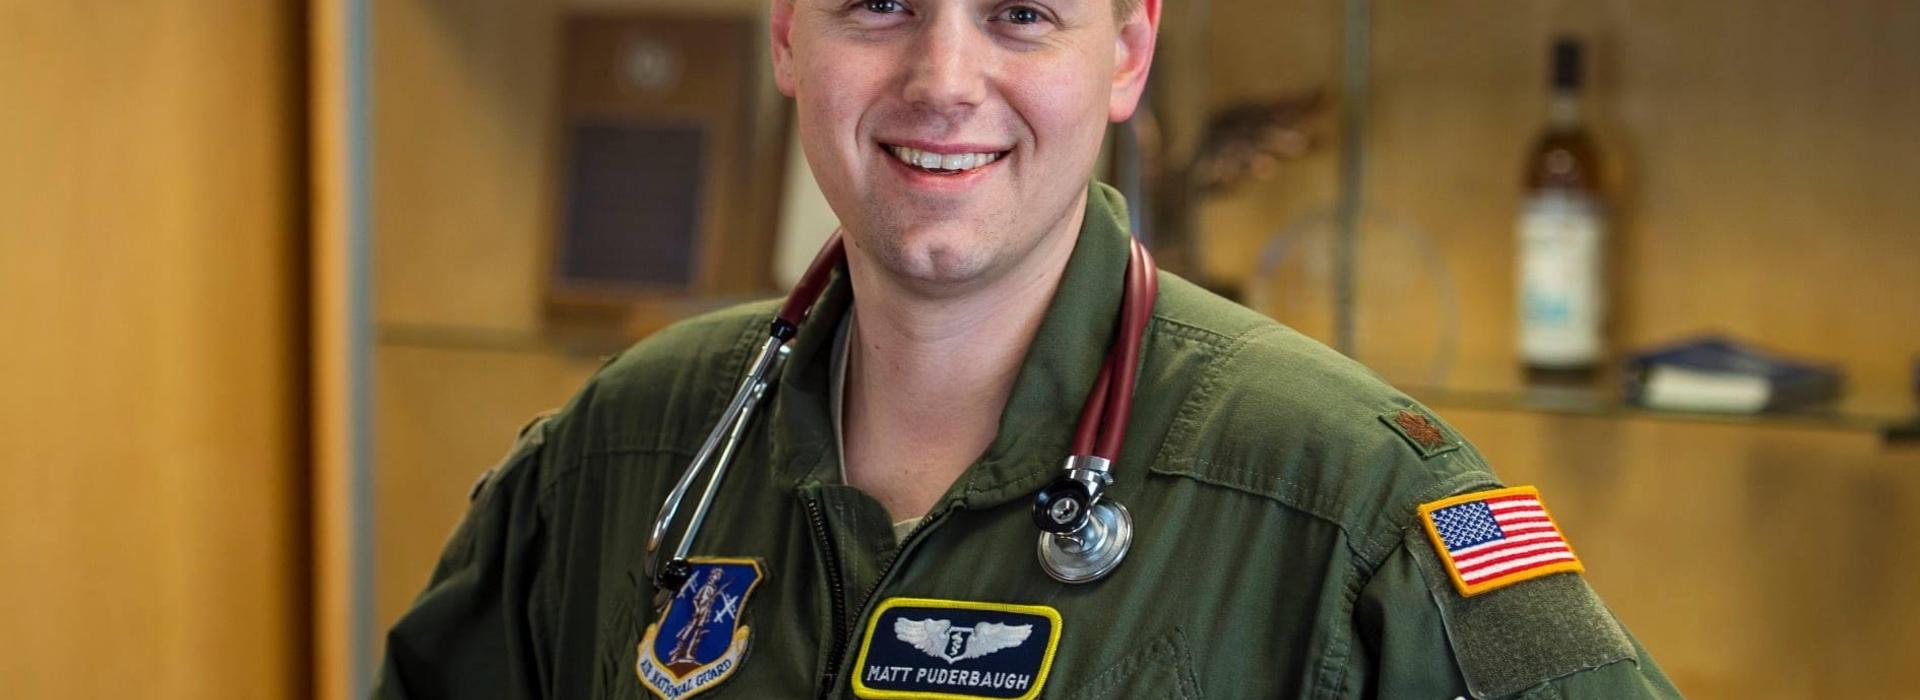 Dr. Matthew Puderbaugh in the National Guard 